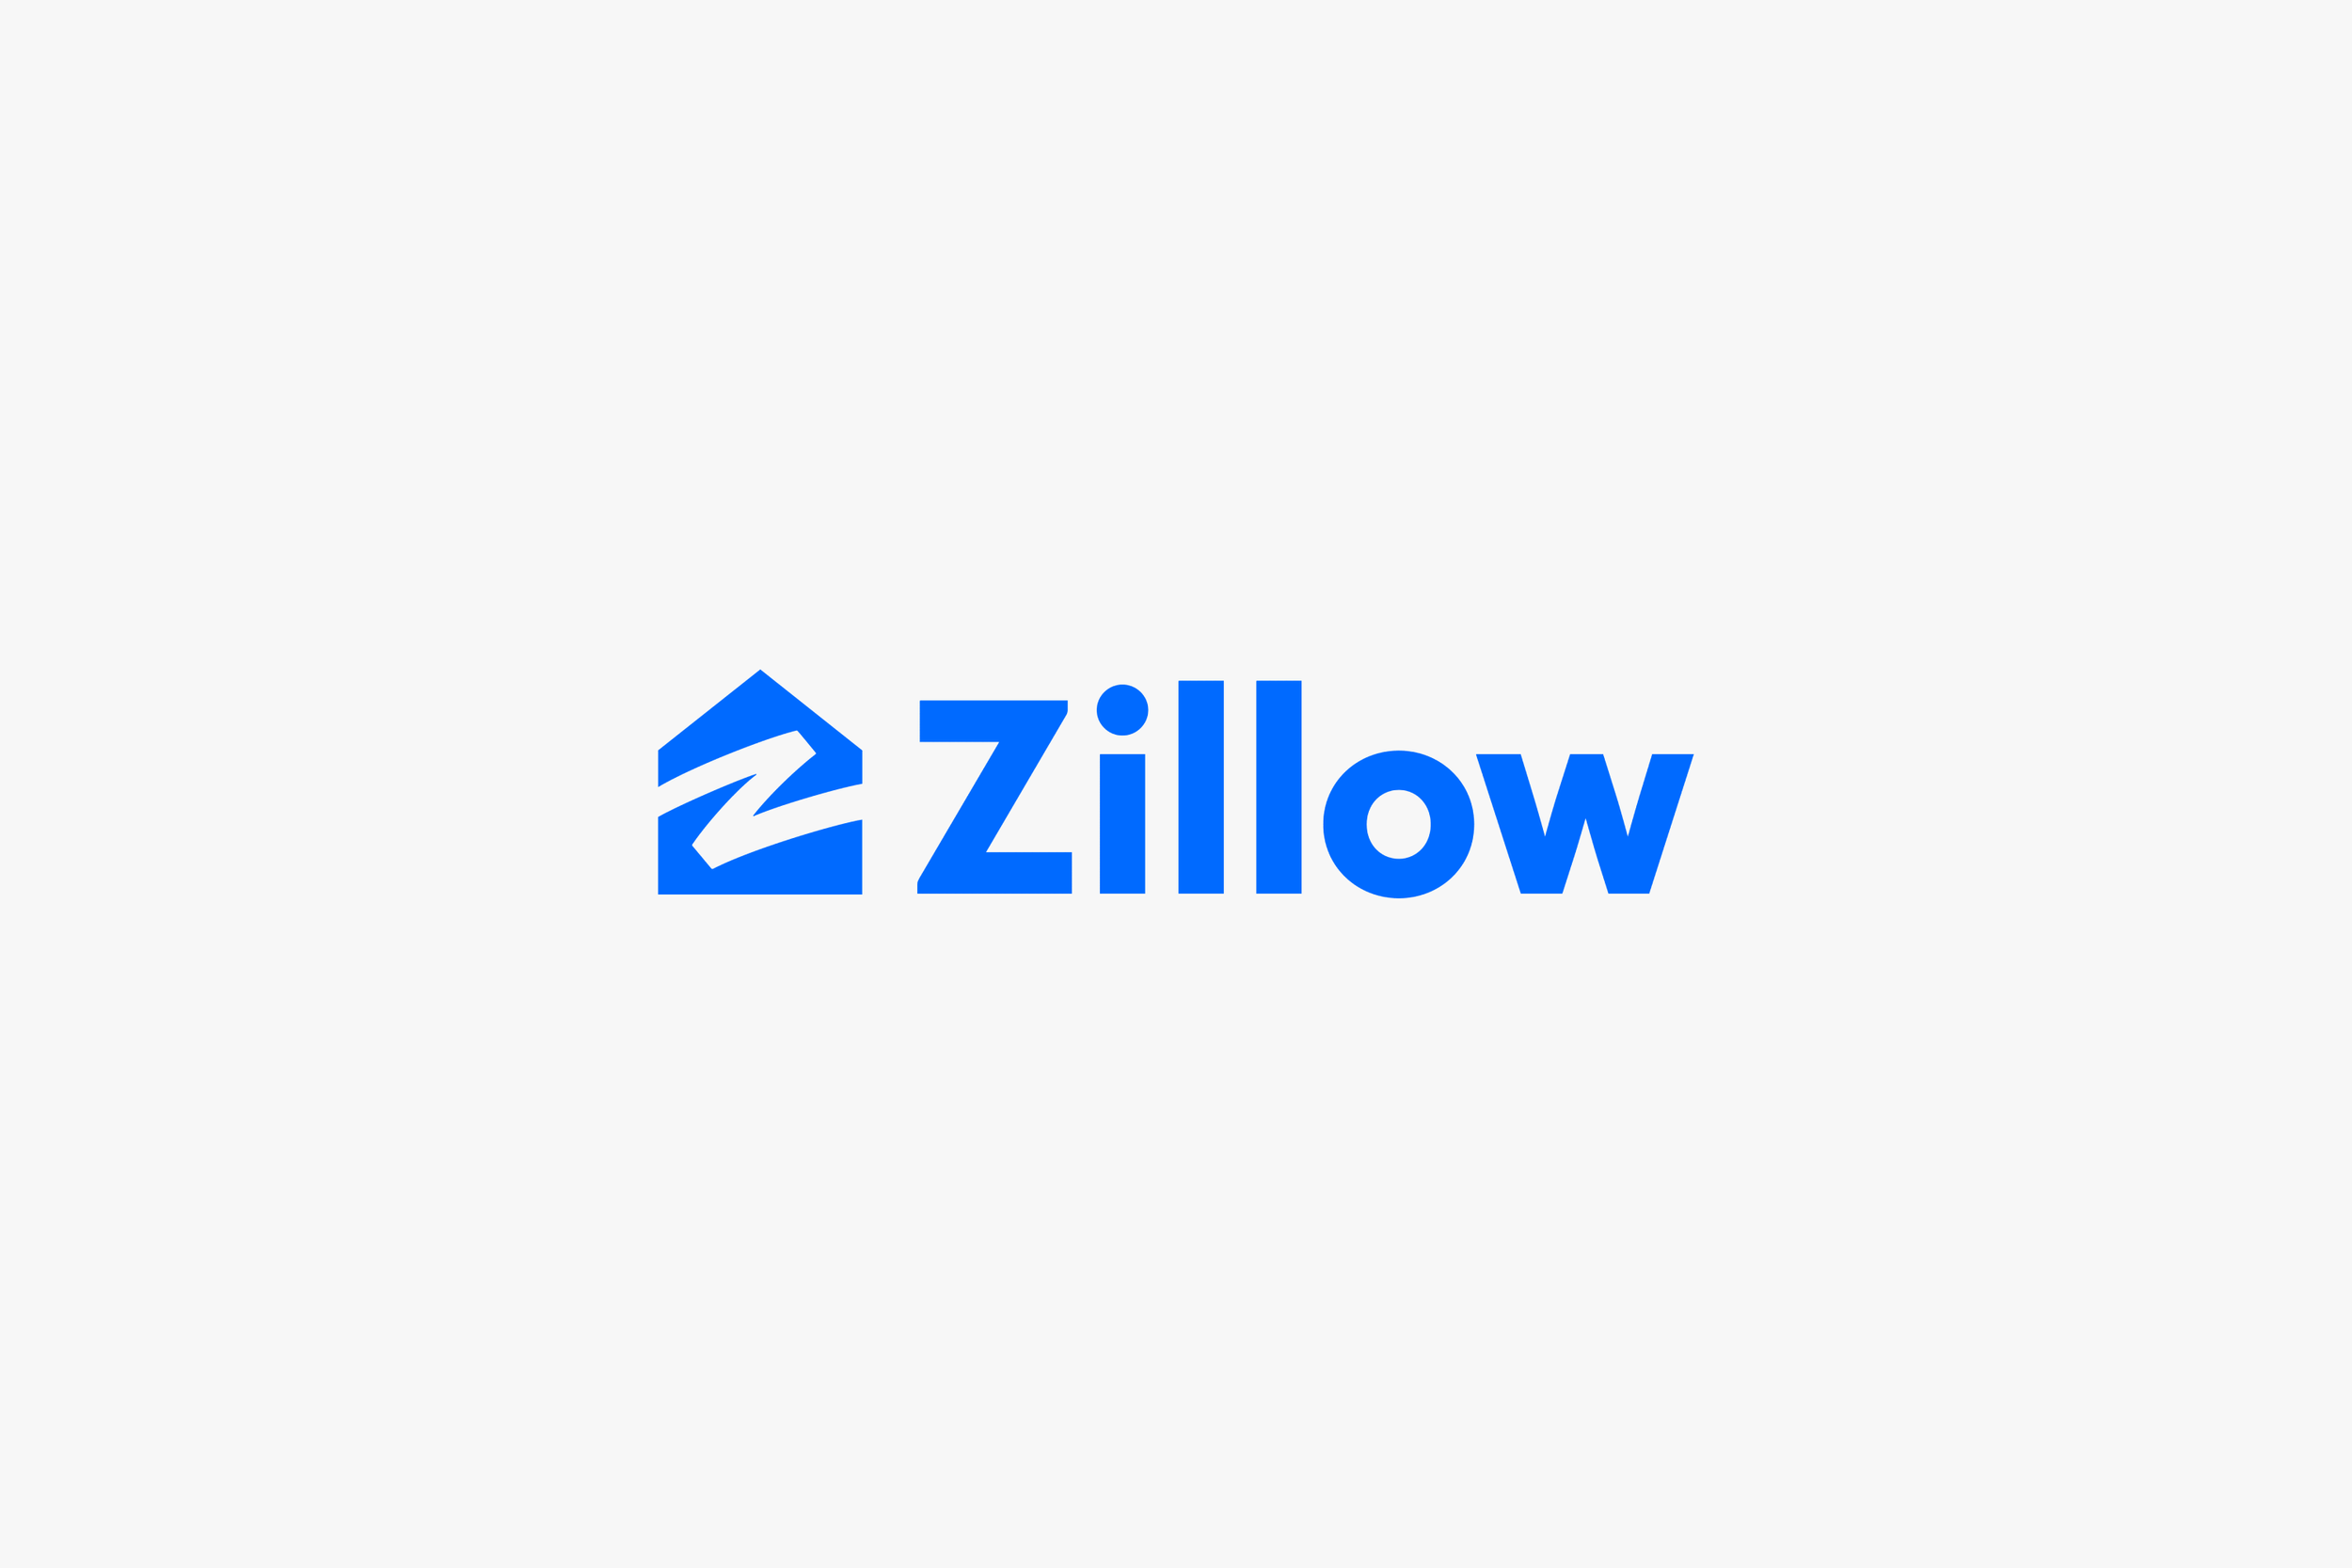 Zillow.png